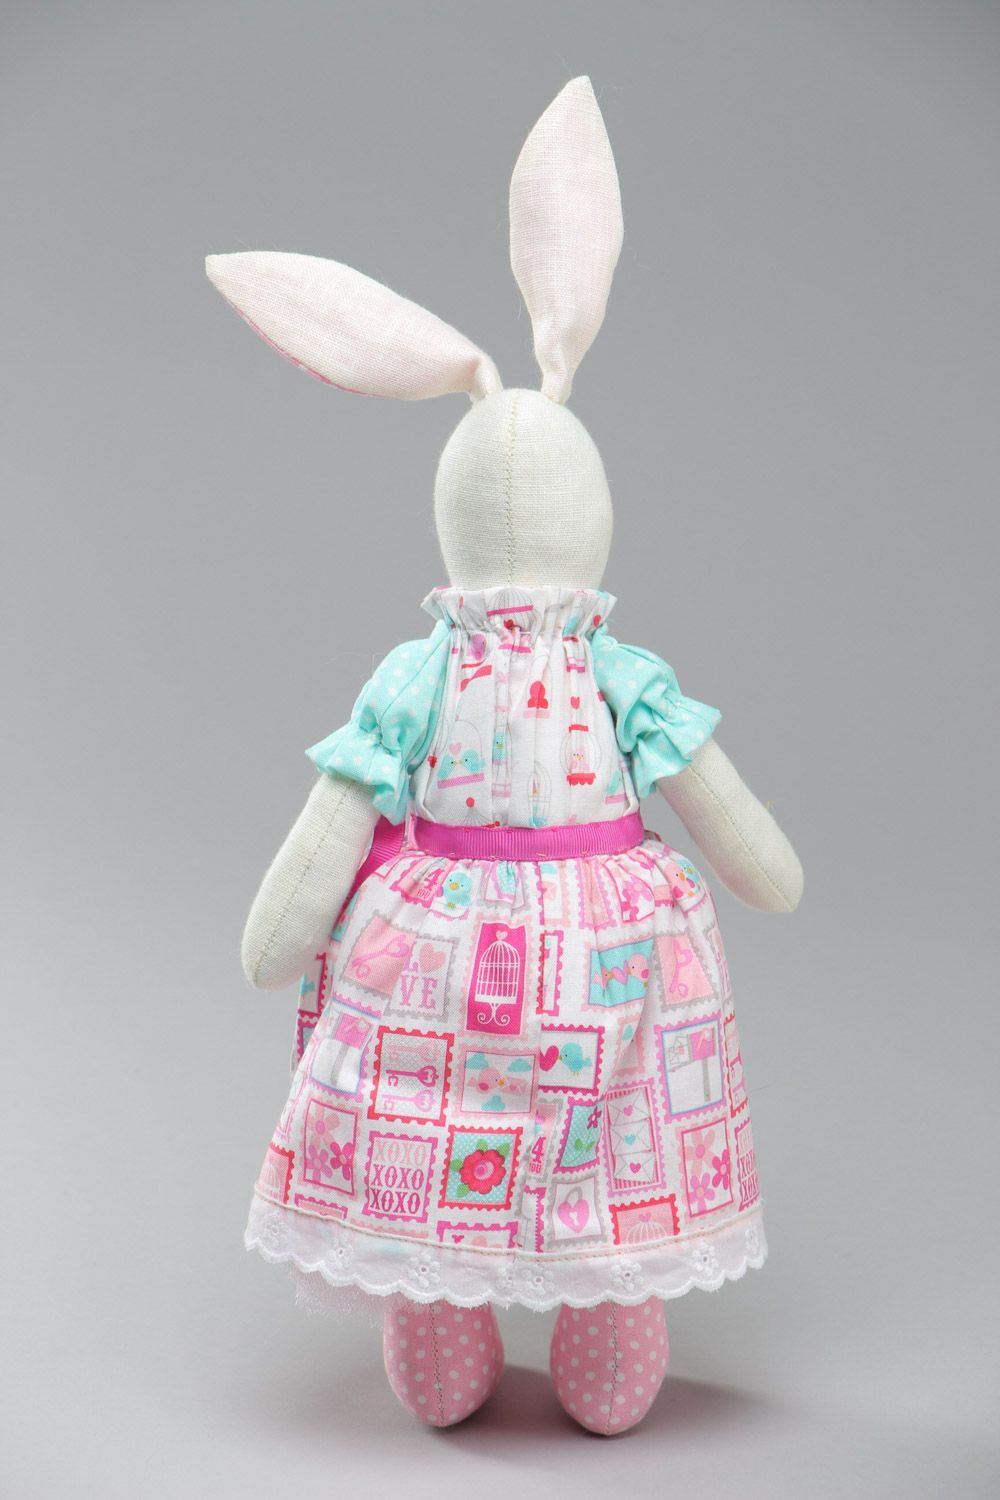 Cute handmade soft toy sewn of natural fabrics Rabbit with pink ears and dress photo 4